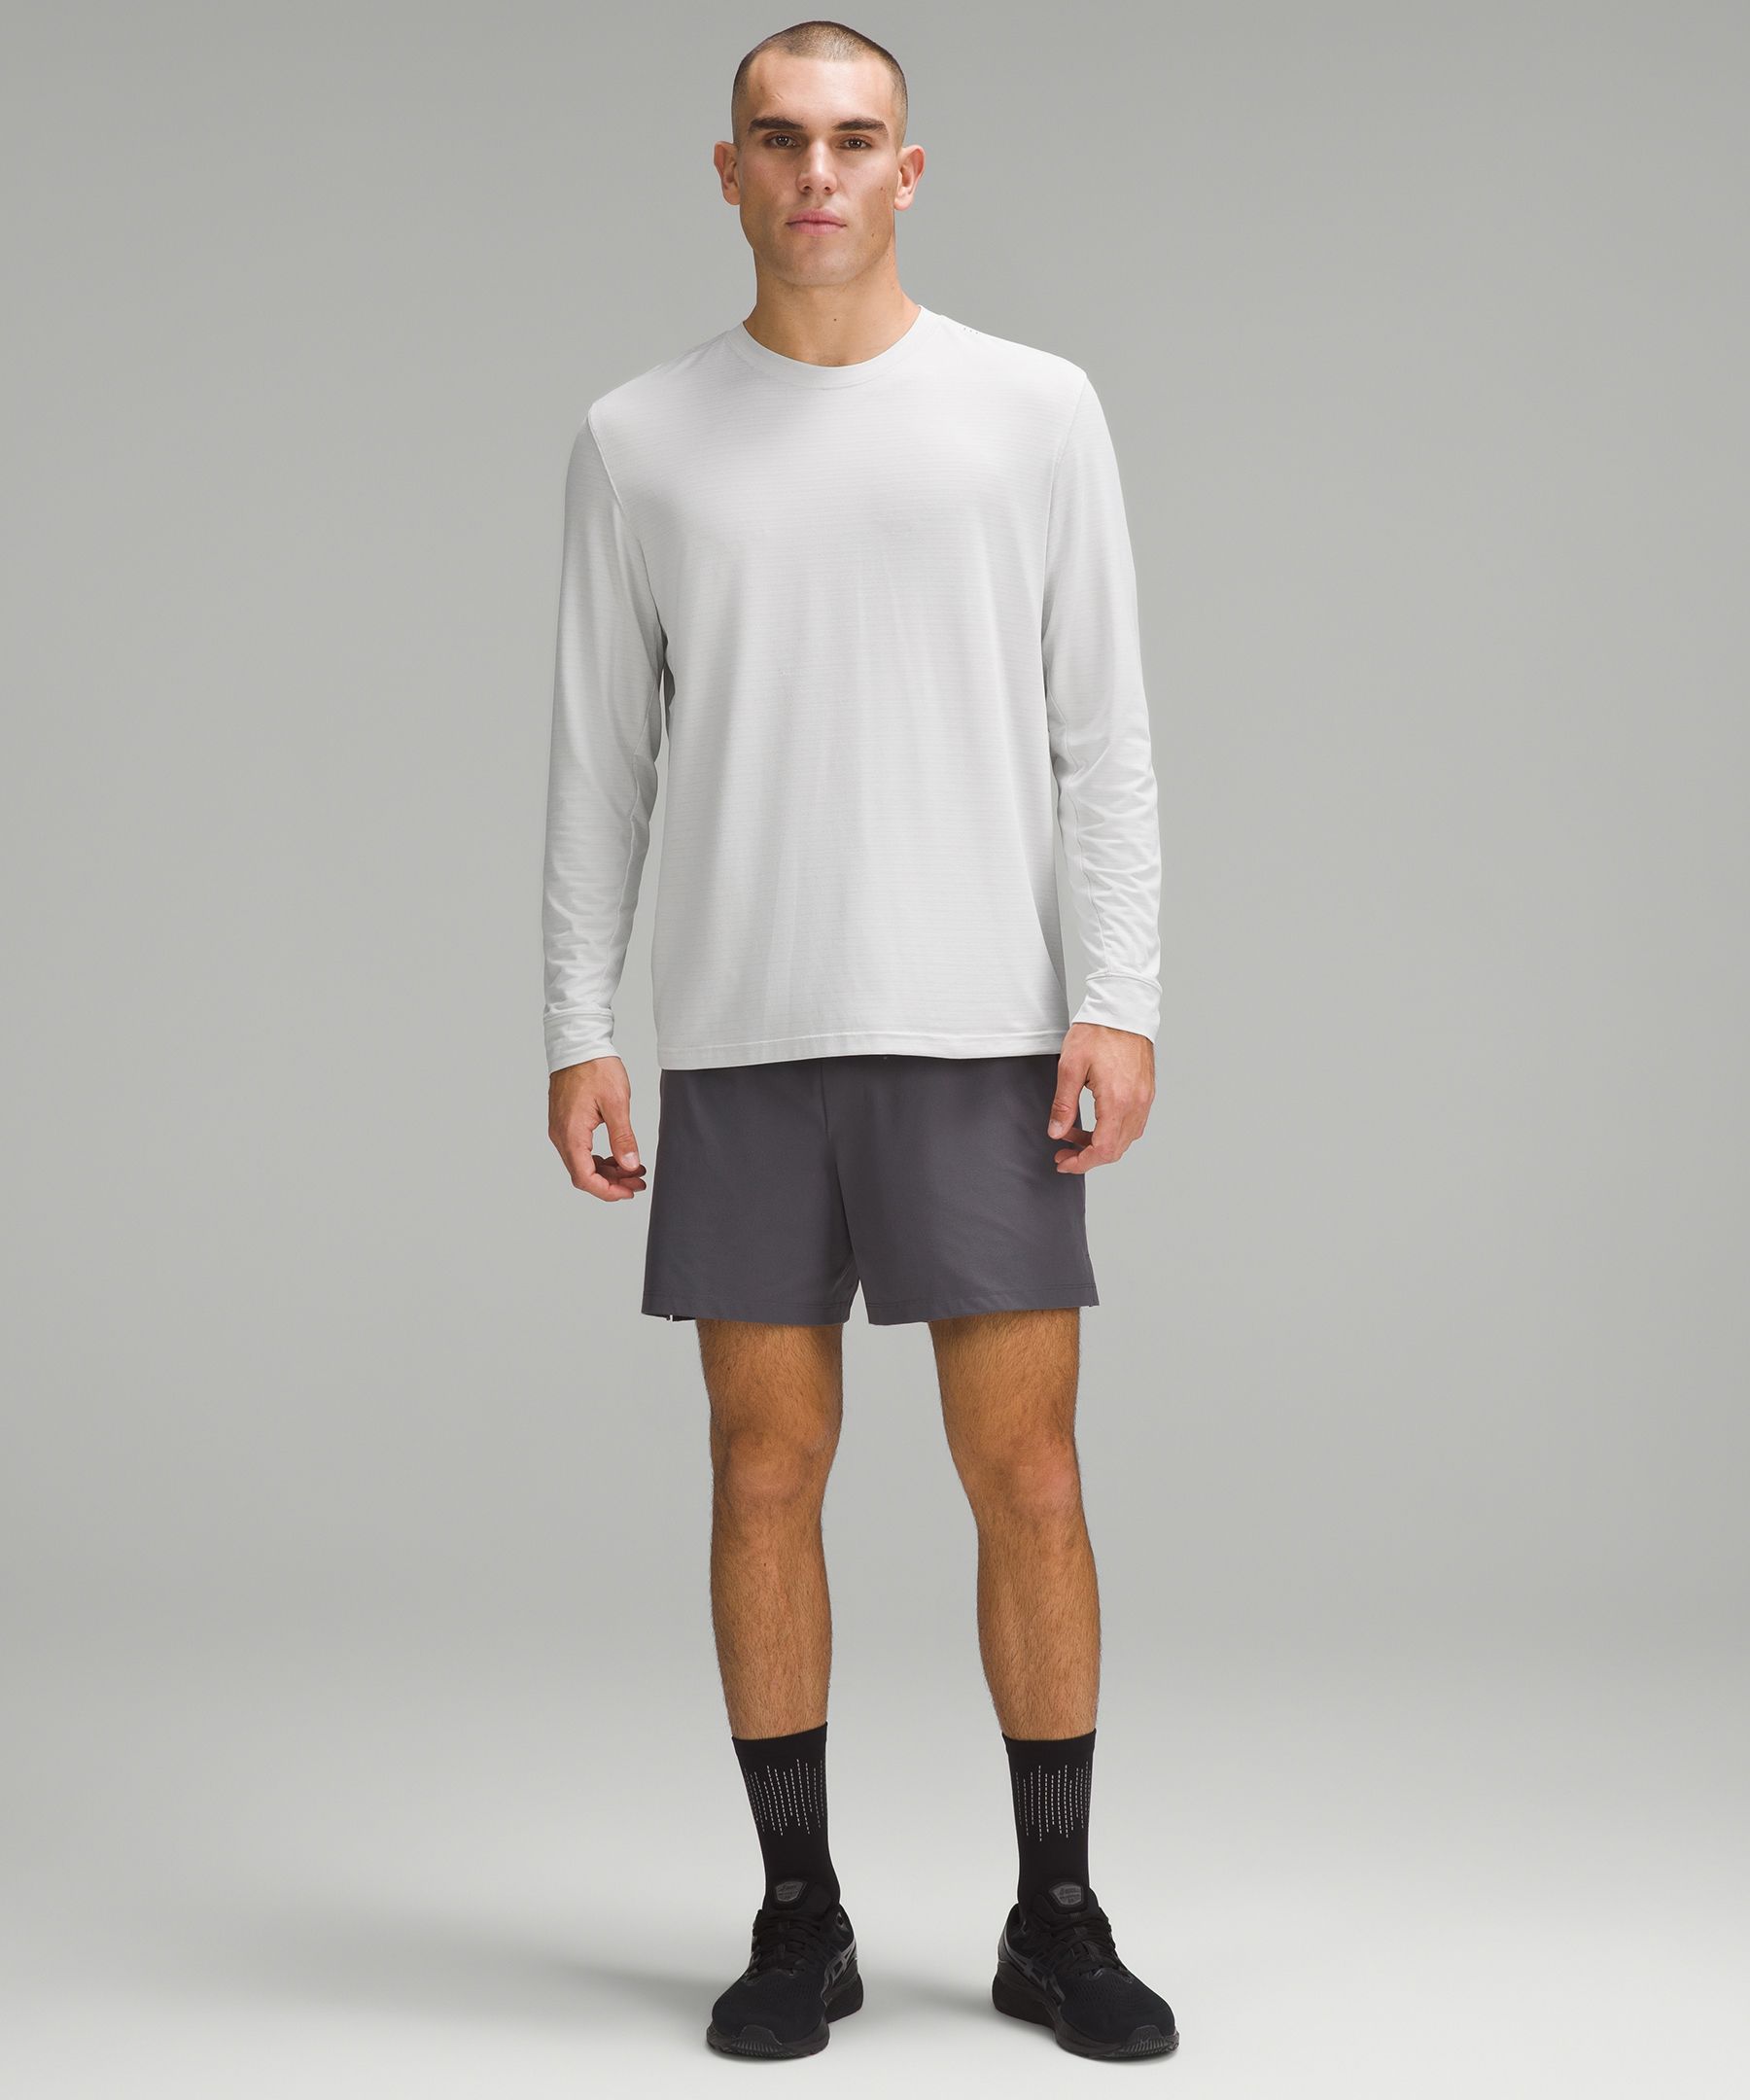 Lululemon athletica License to Train Classic-Fit Long-Sleeve Shirt